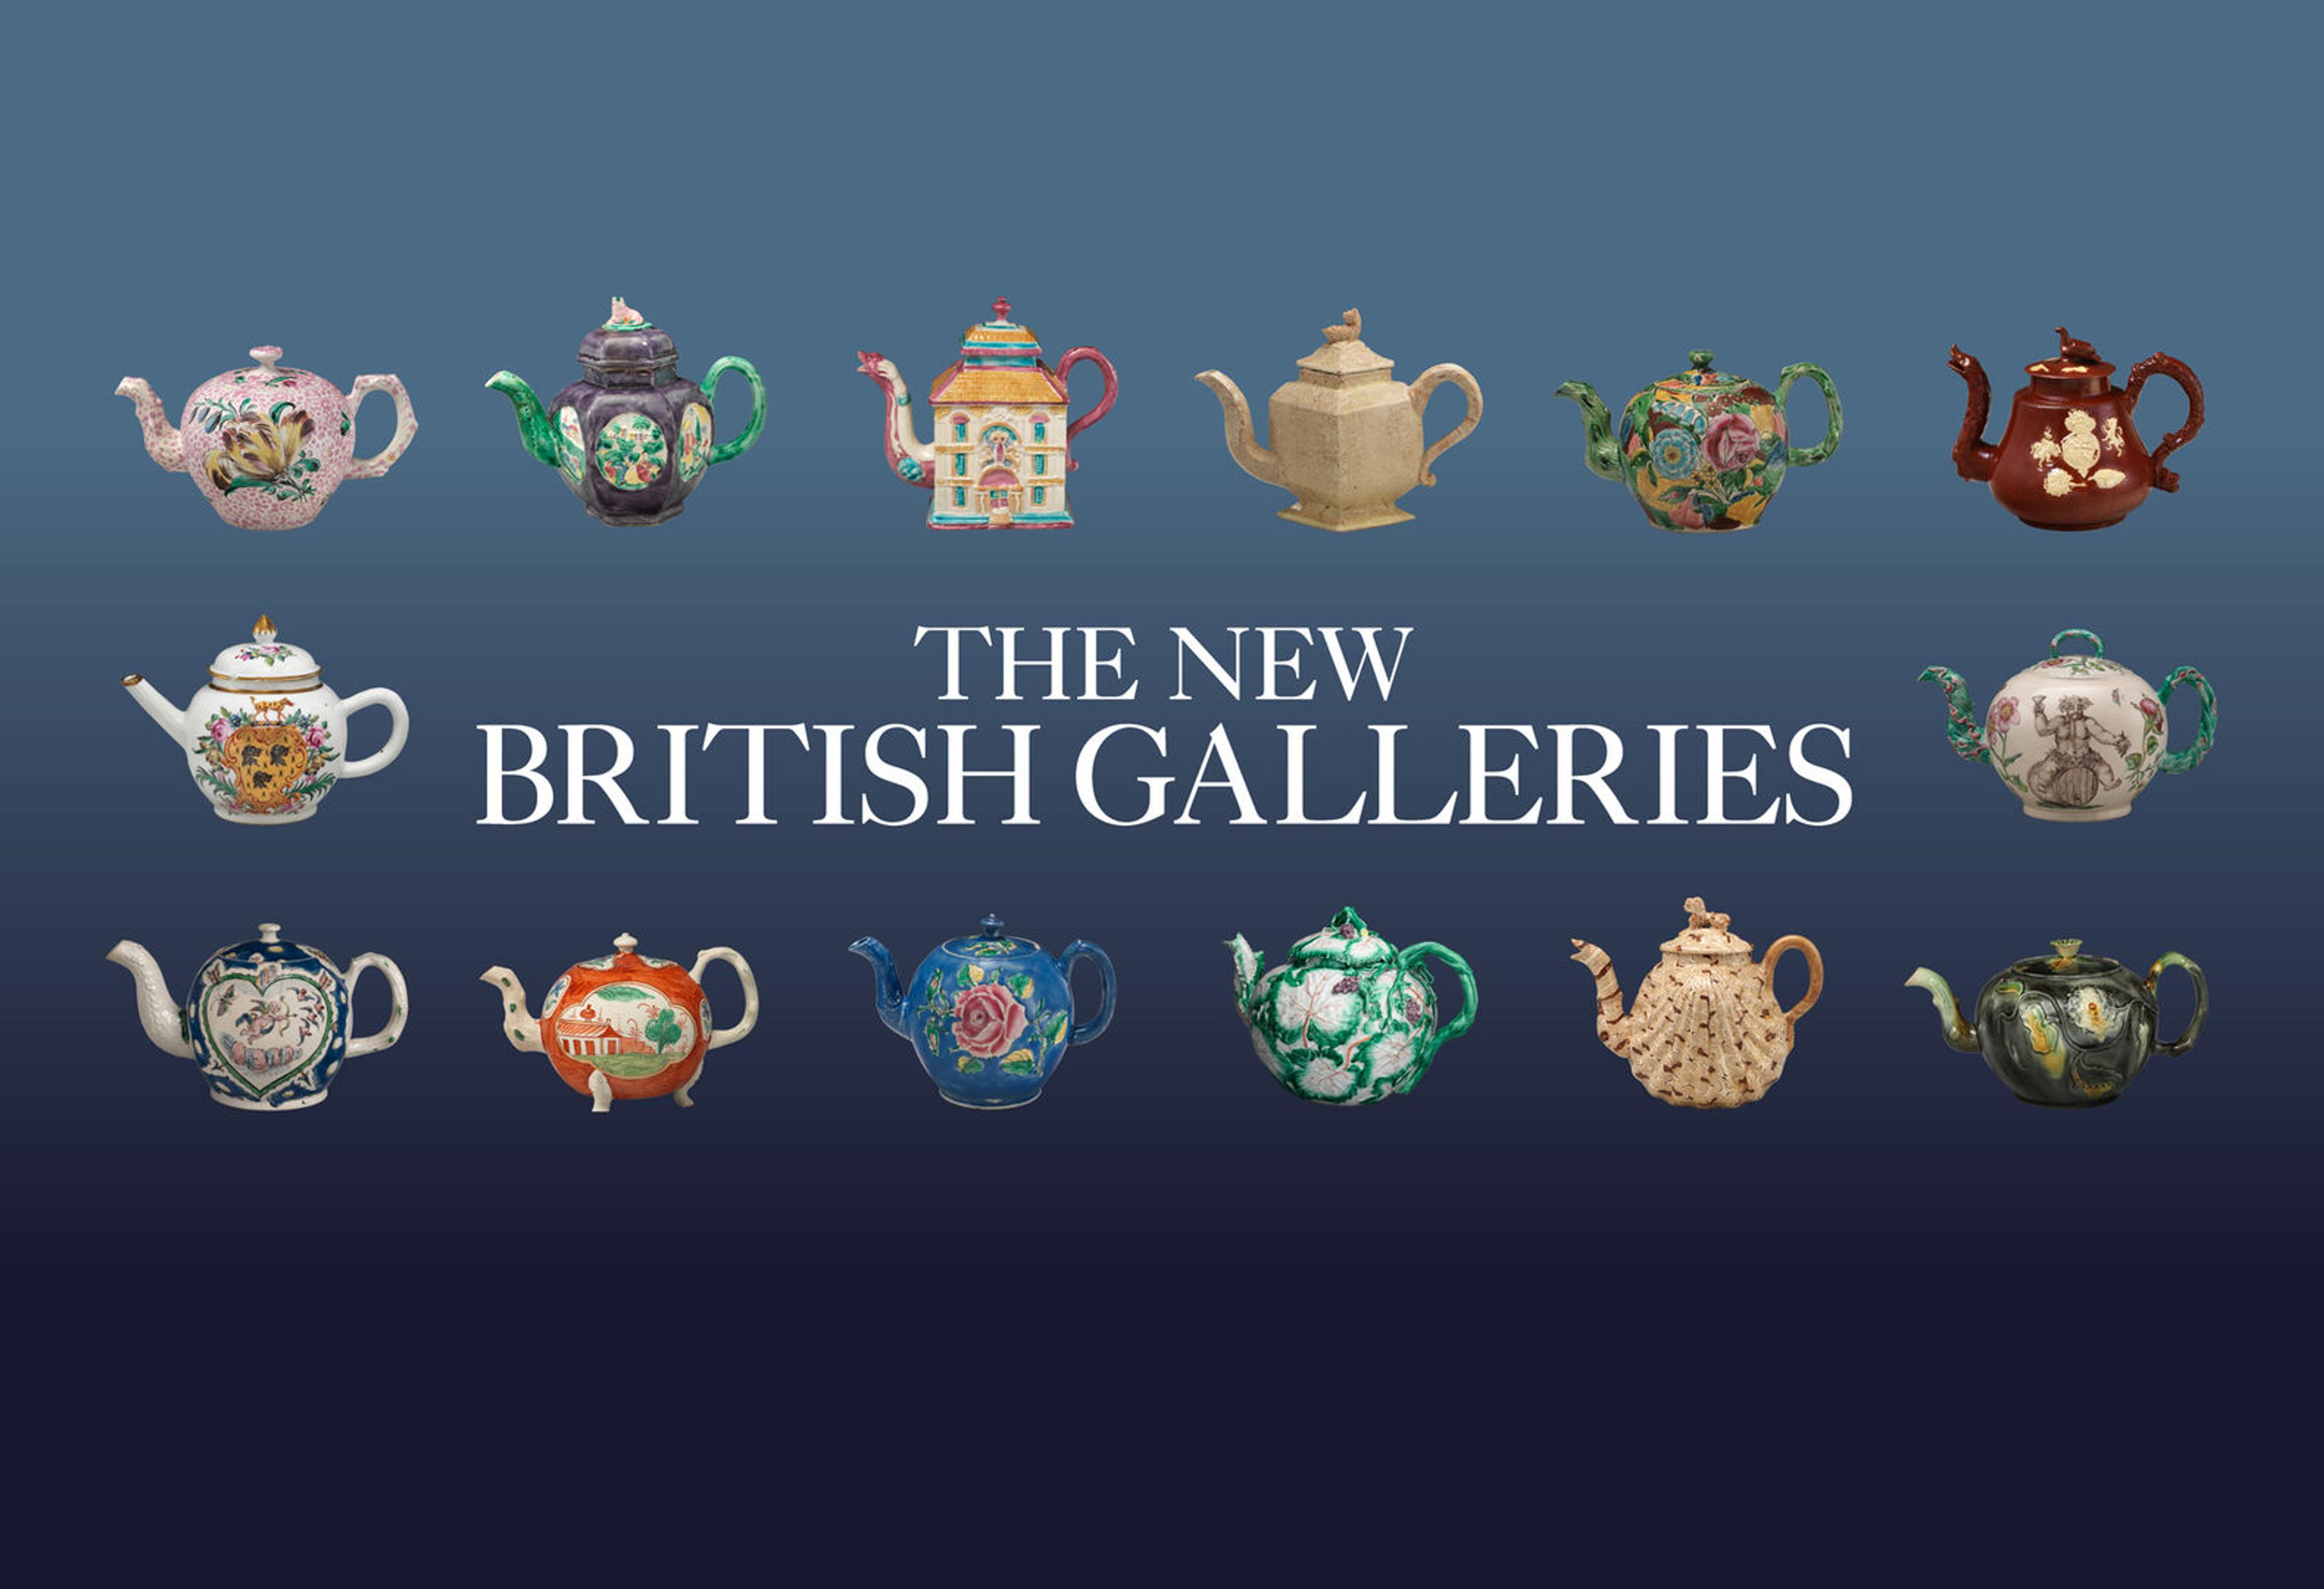 Promotional image for The Met's British Galleries, featuring an array of teapots.